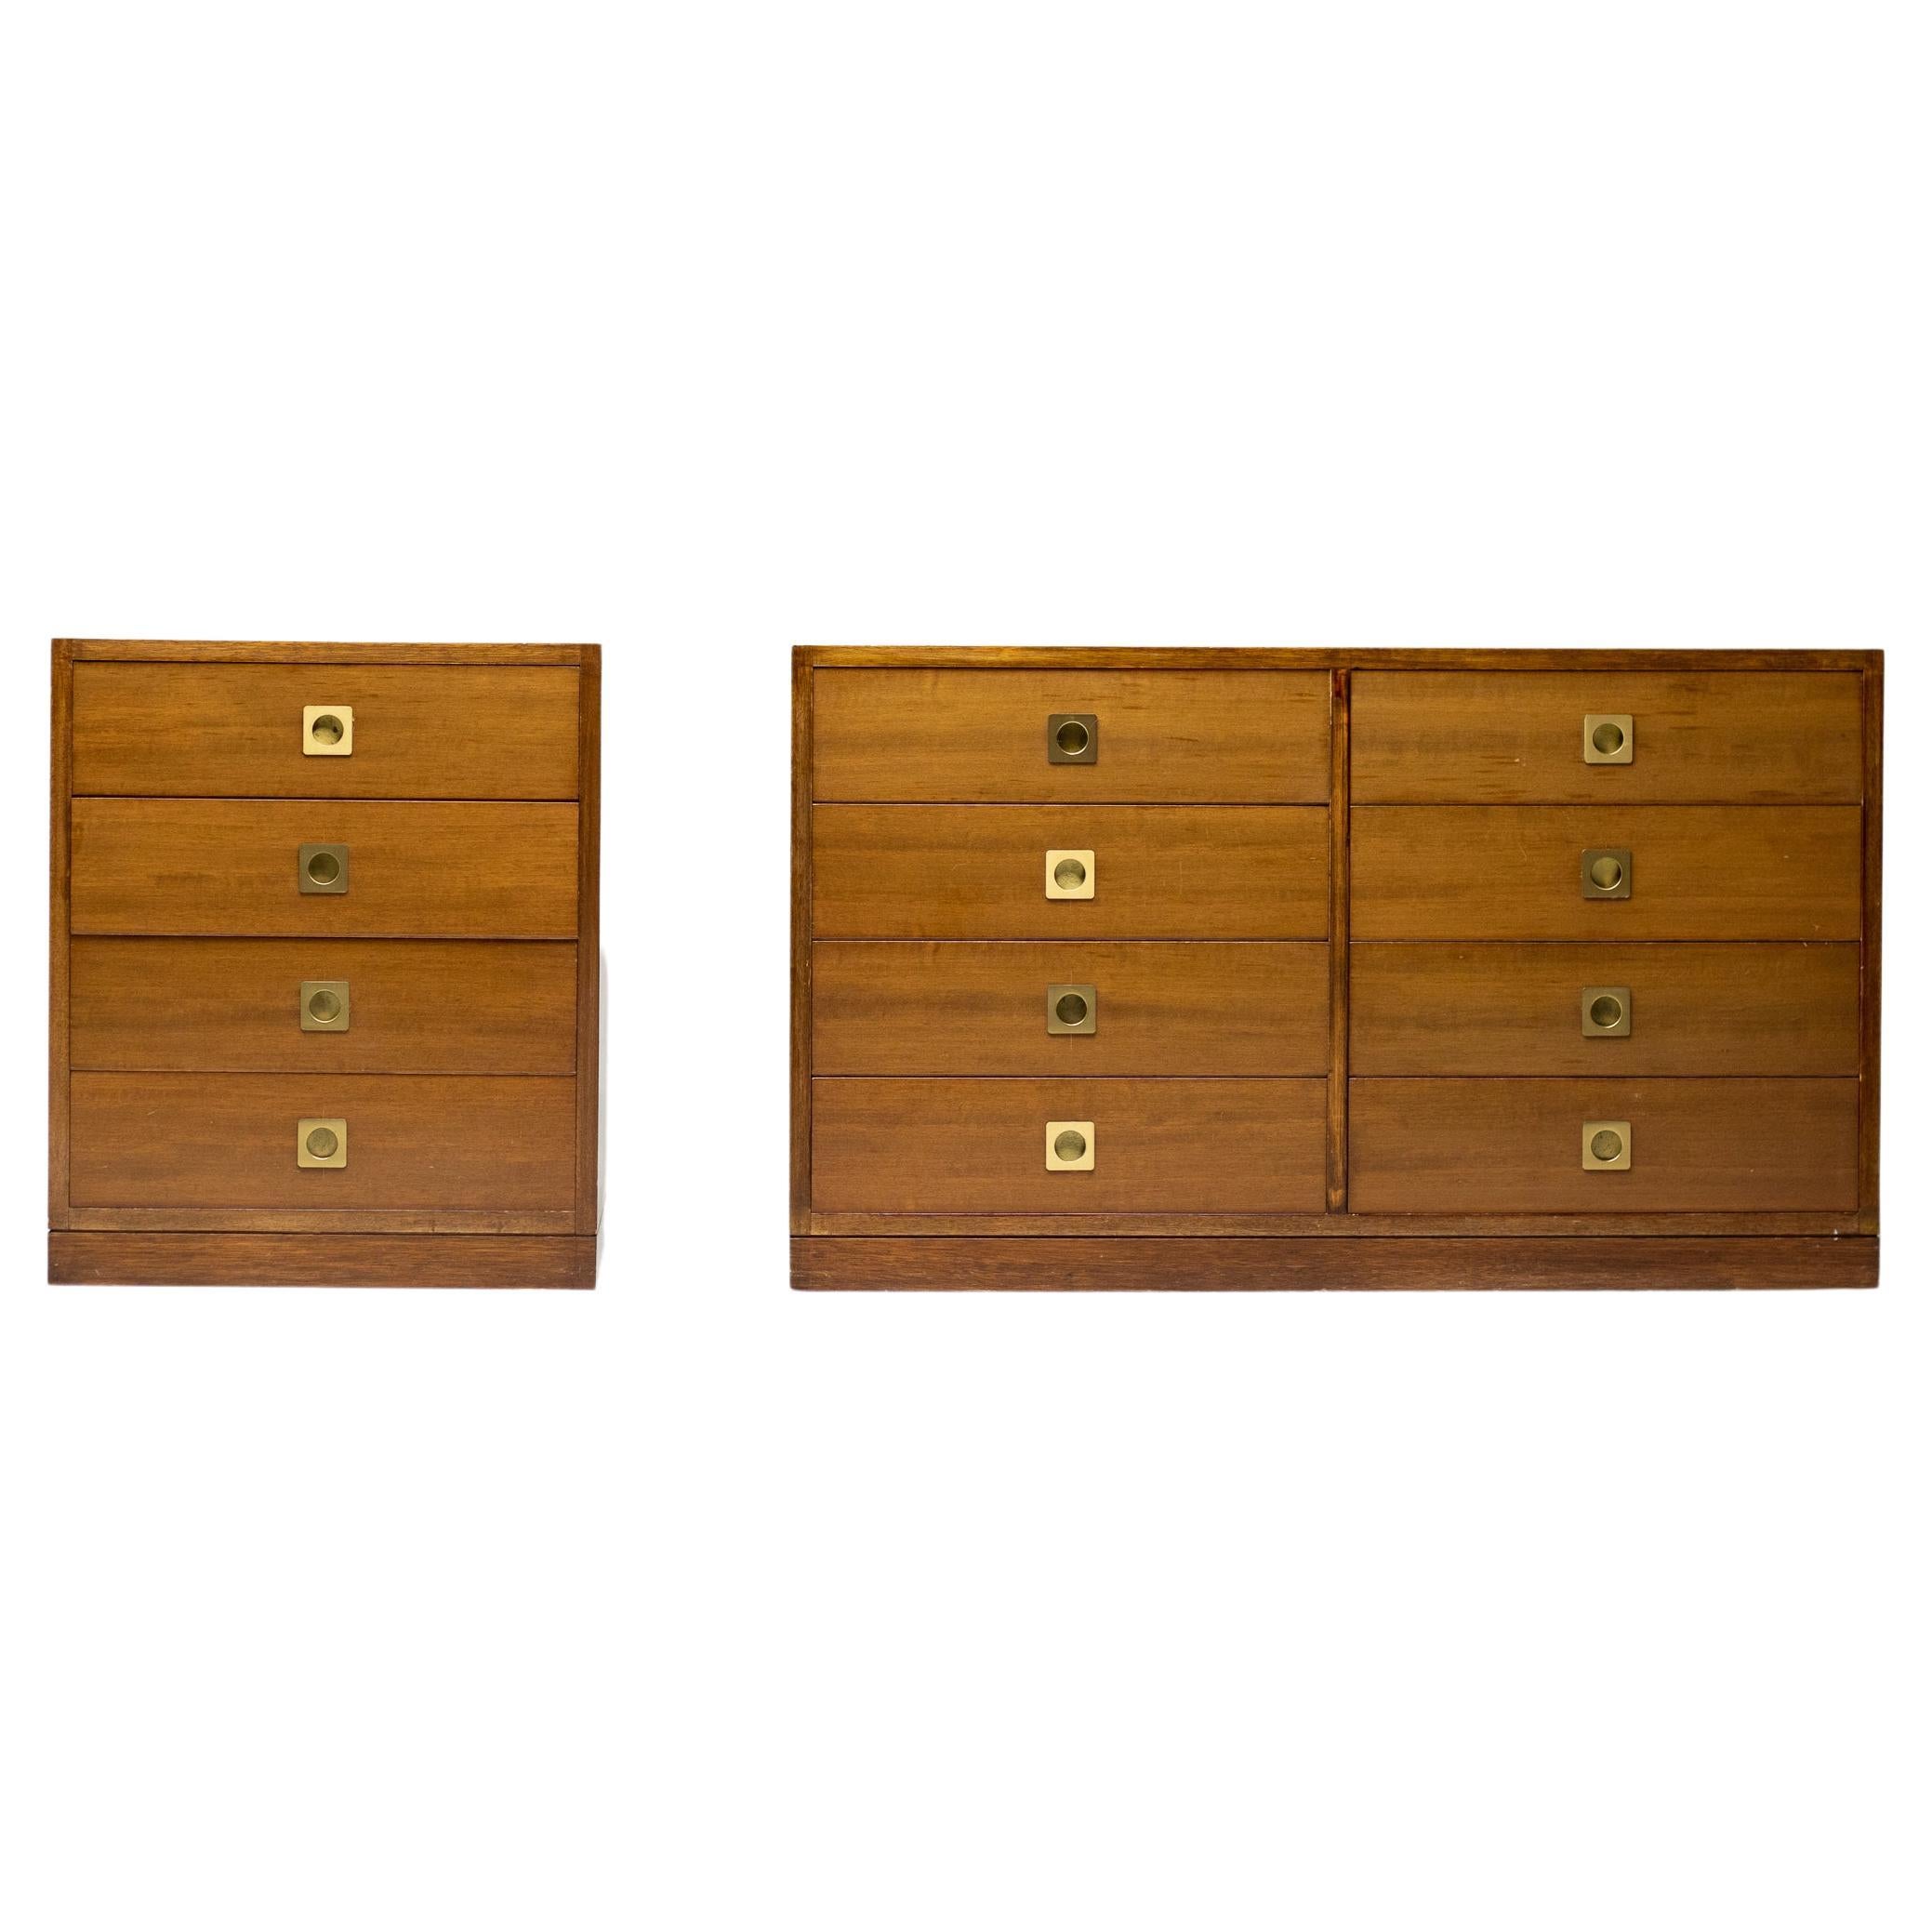 Chest of Drawers Set in Walnut